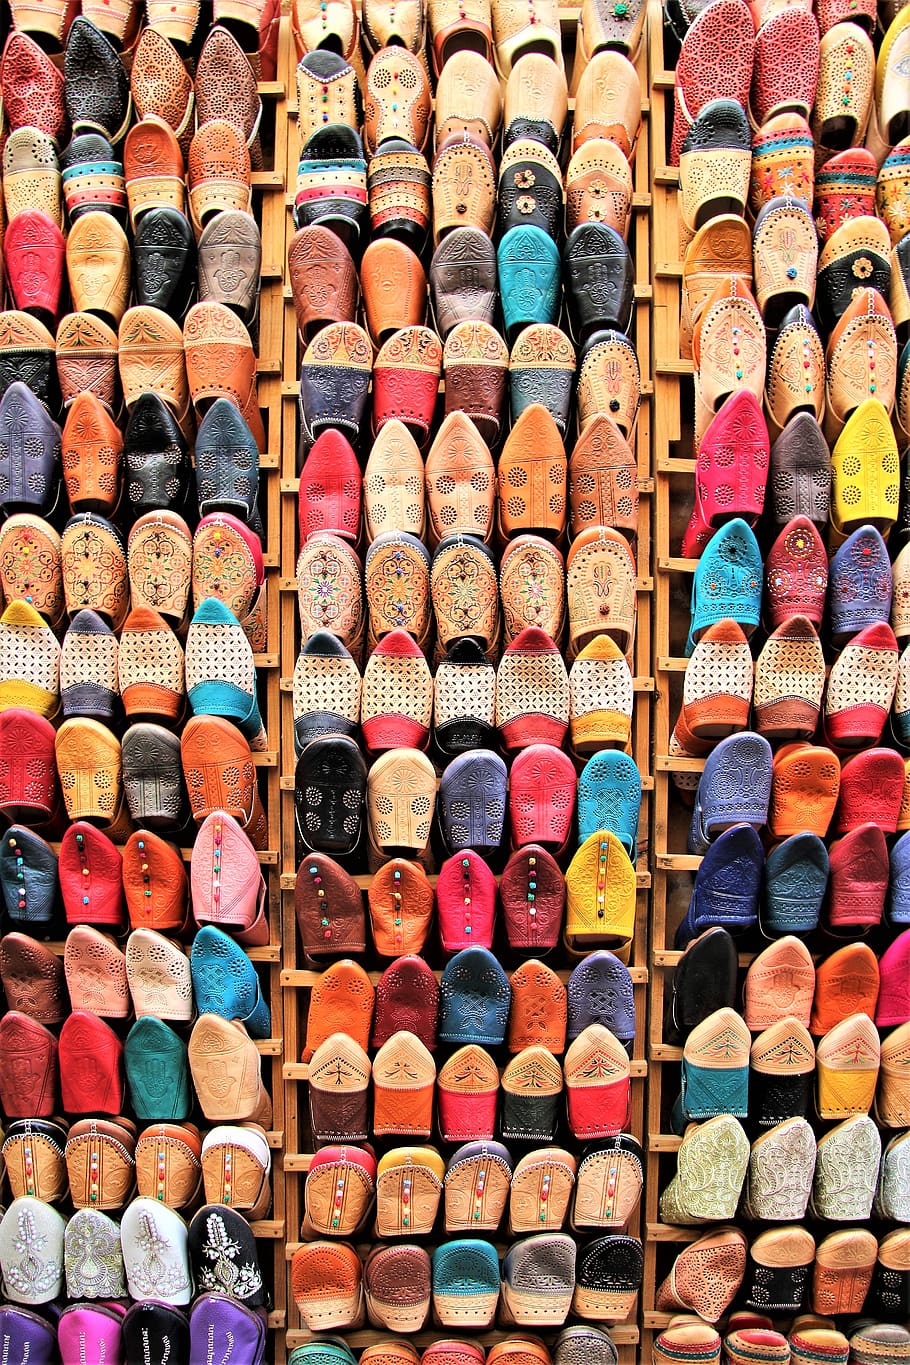 shoes, sales stand, tradition, craft, handmade, colorful, color, morocco, art, hand labor